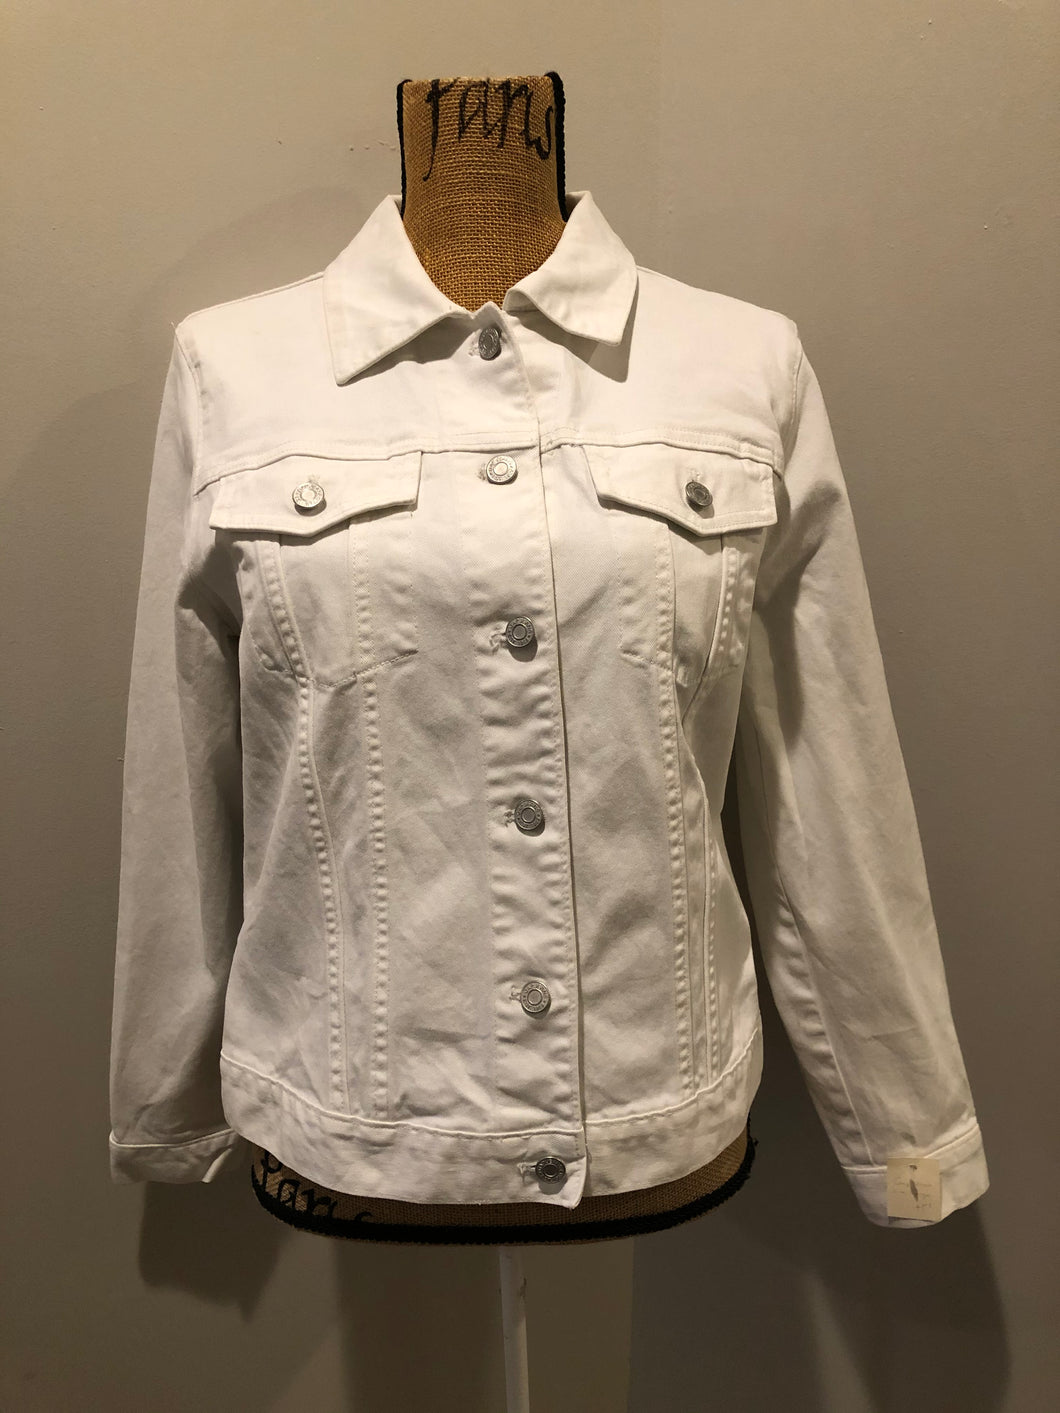 Kingspier Vintage - Gap stretch denim jacket in white with button closures and two flap pockets on the chest. Size large.